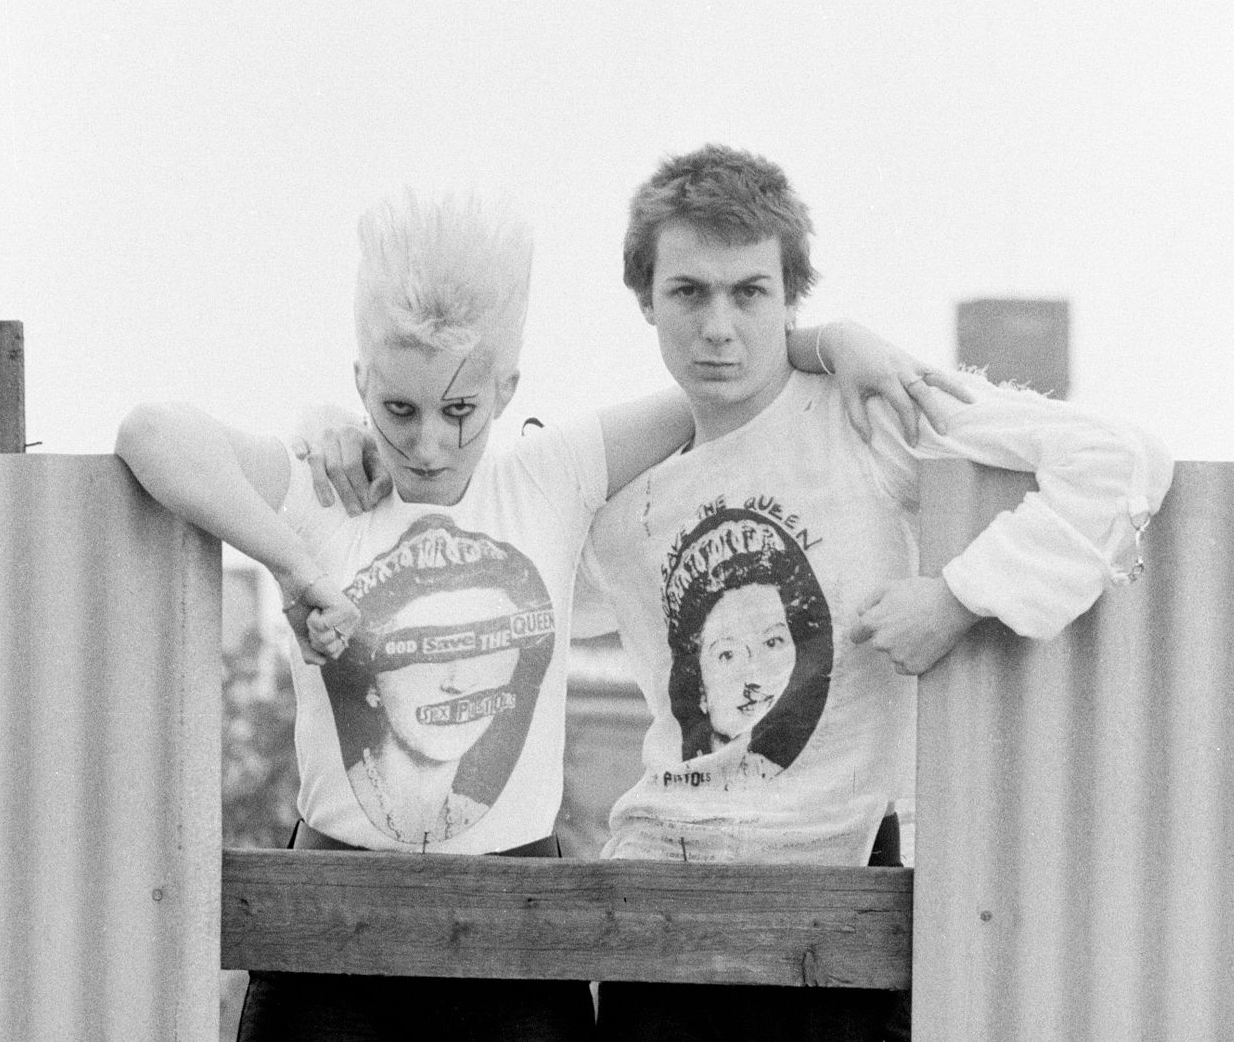 Punk fashions for him and her from Seditionaries